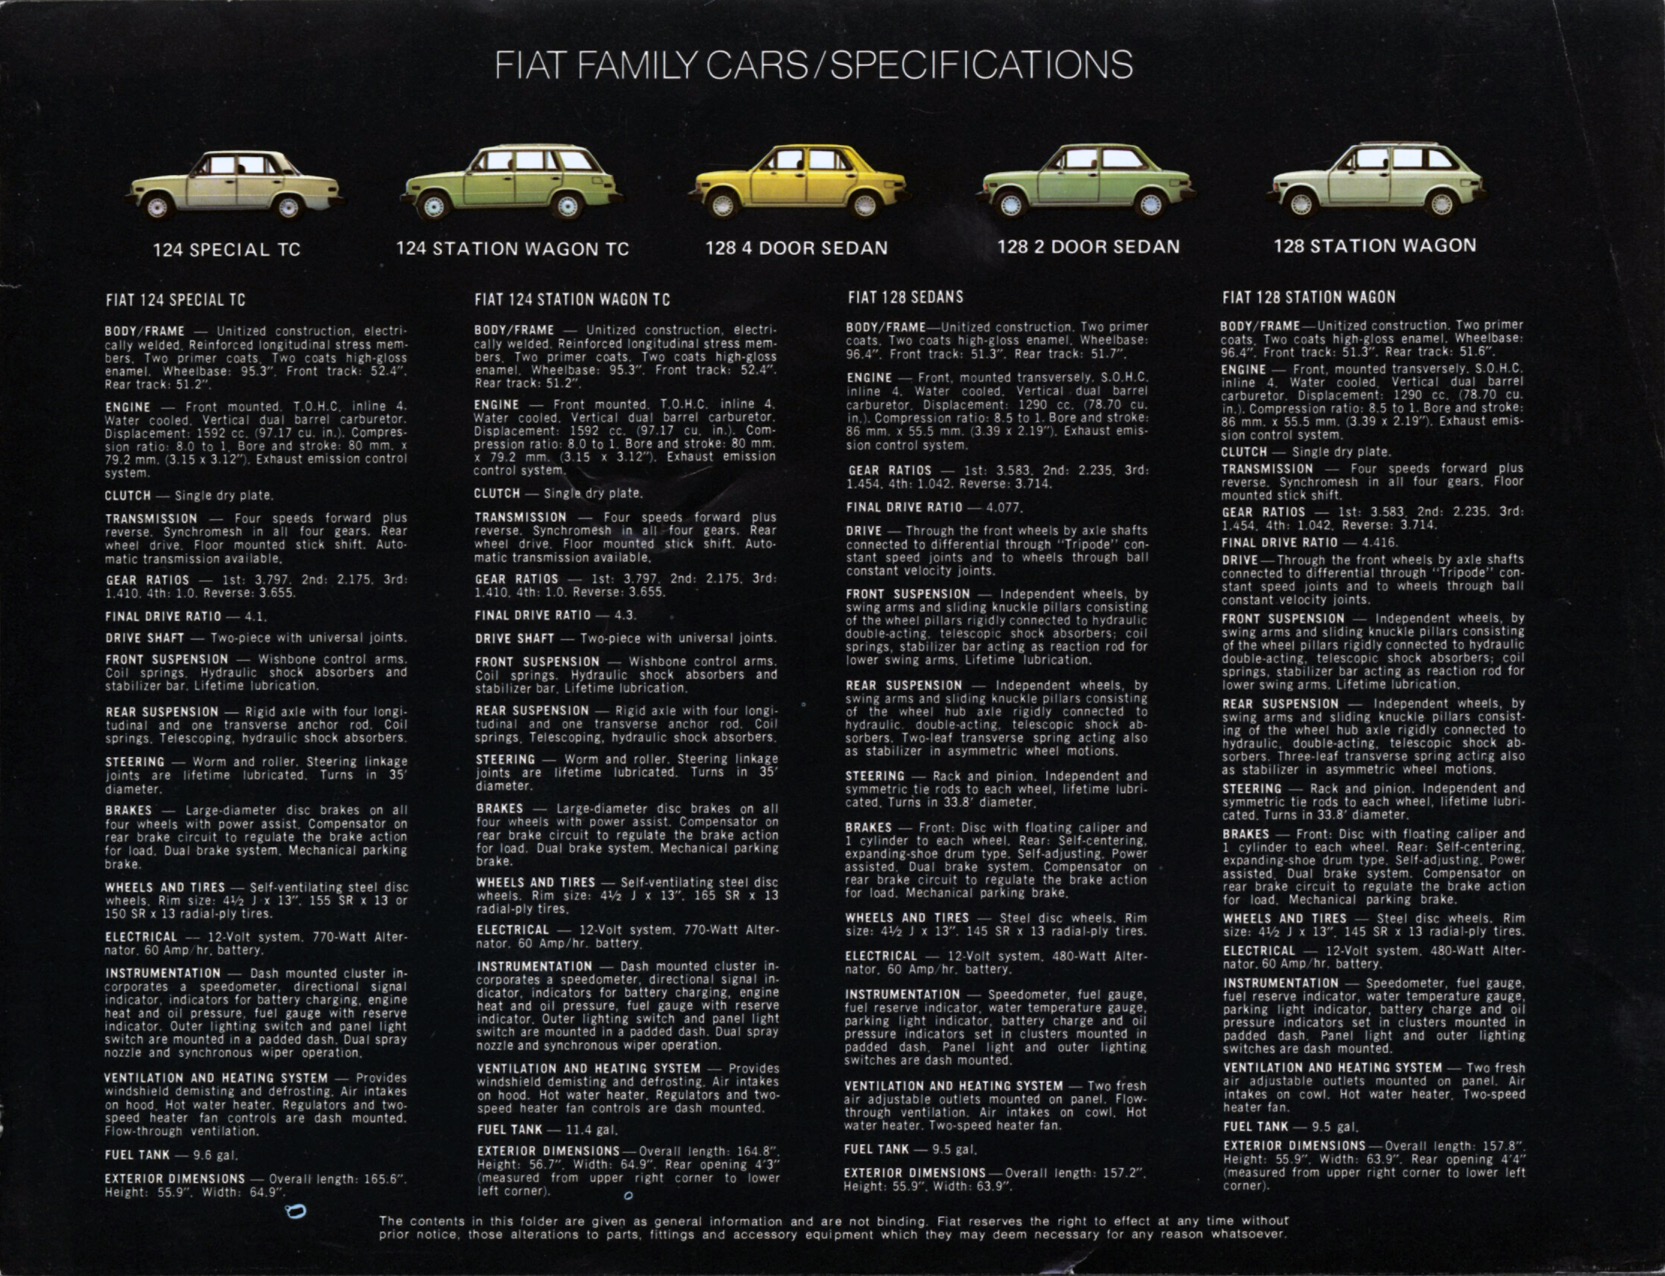 1974 Fiat Full-Line Brochure Page 2